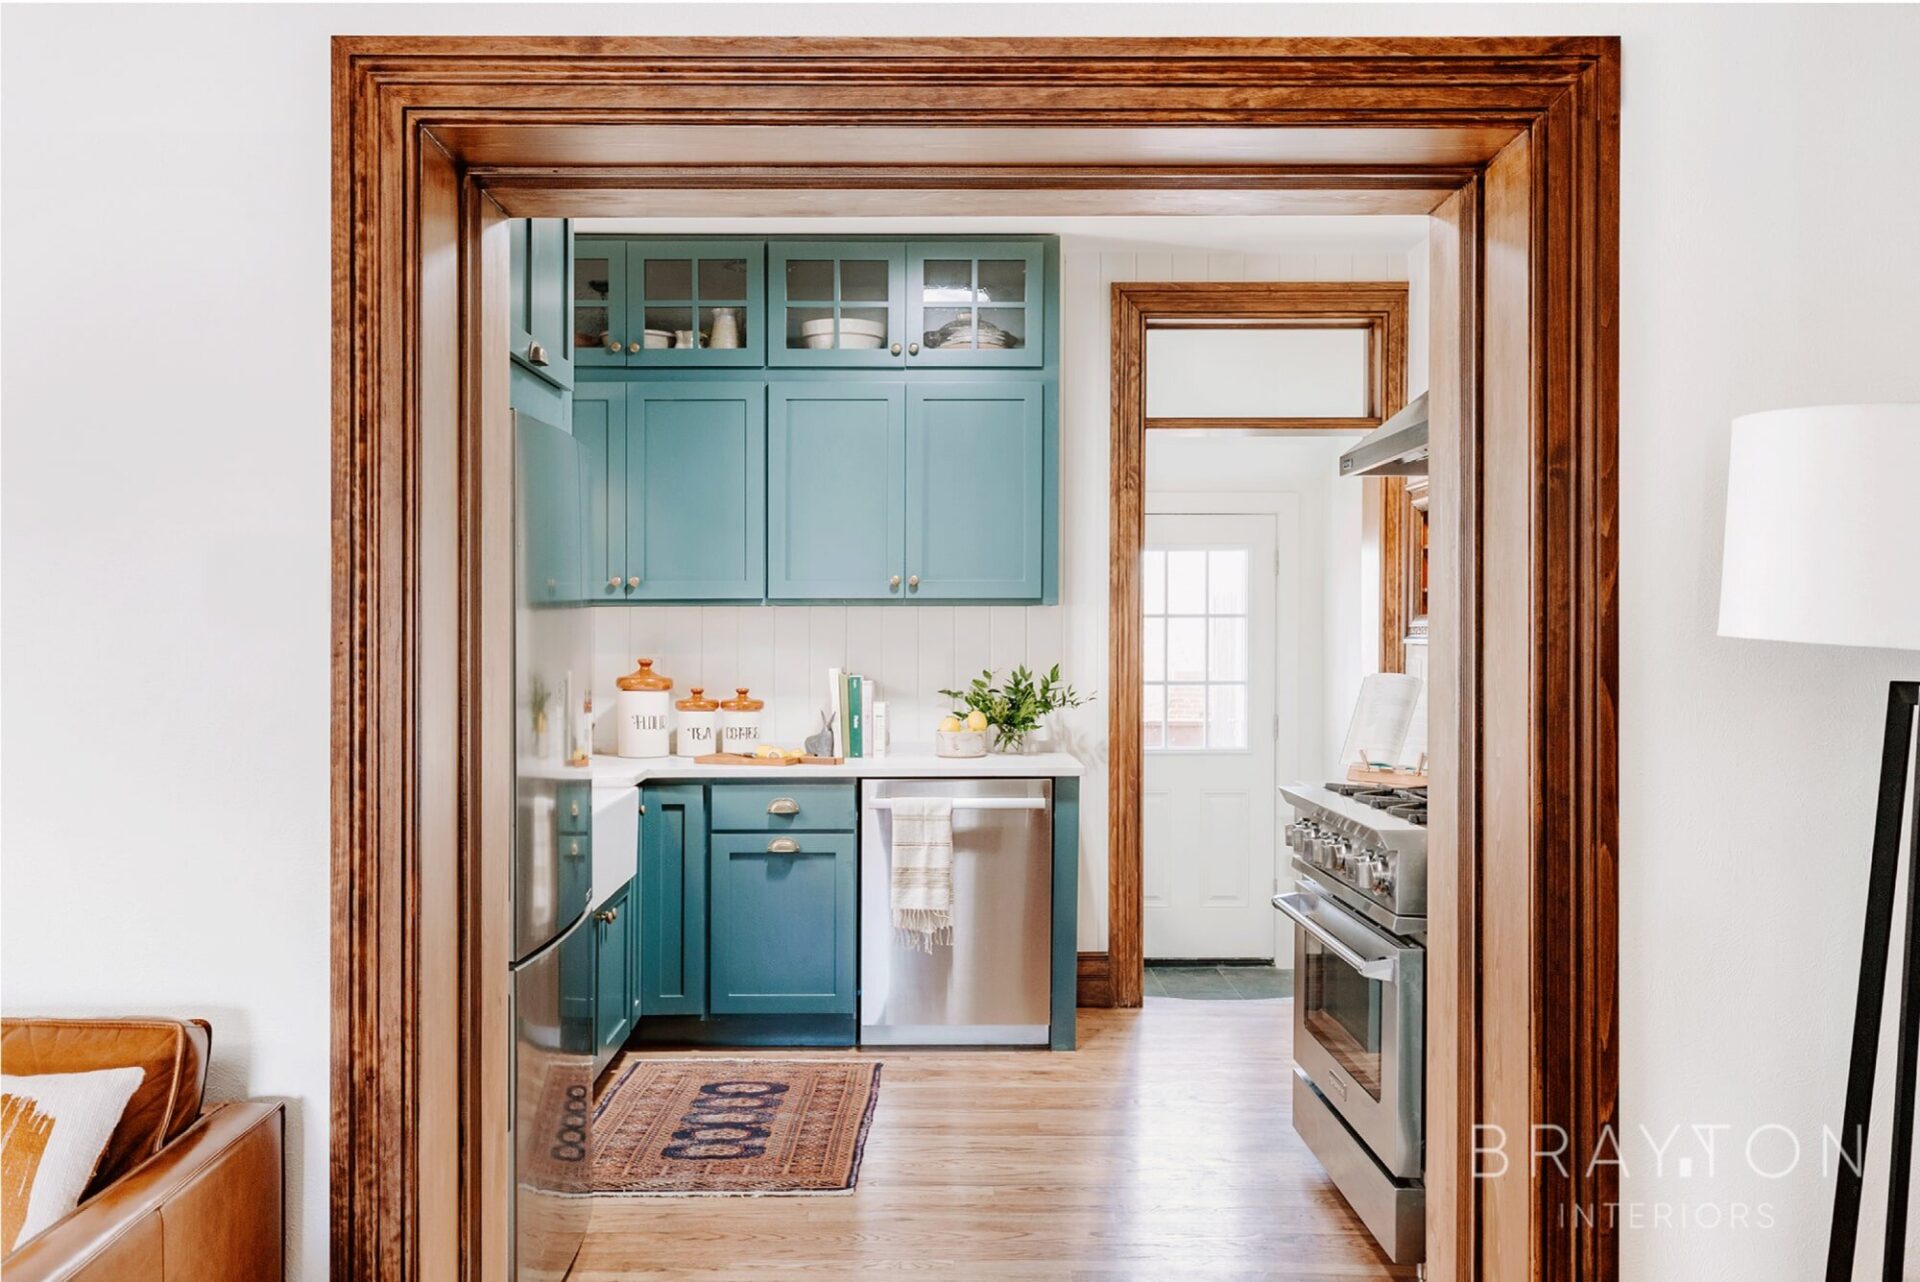 To create a more open concept in a historic home, a larger entryway was created with custom millwork to keep with the original architecture and design of this home.